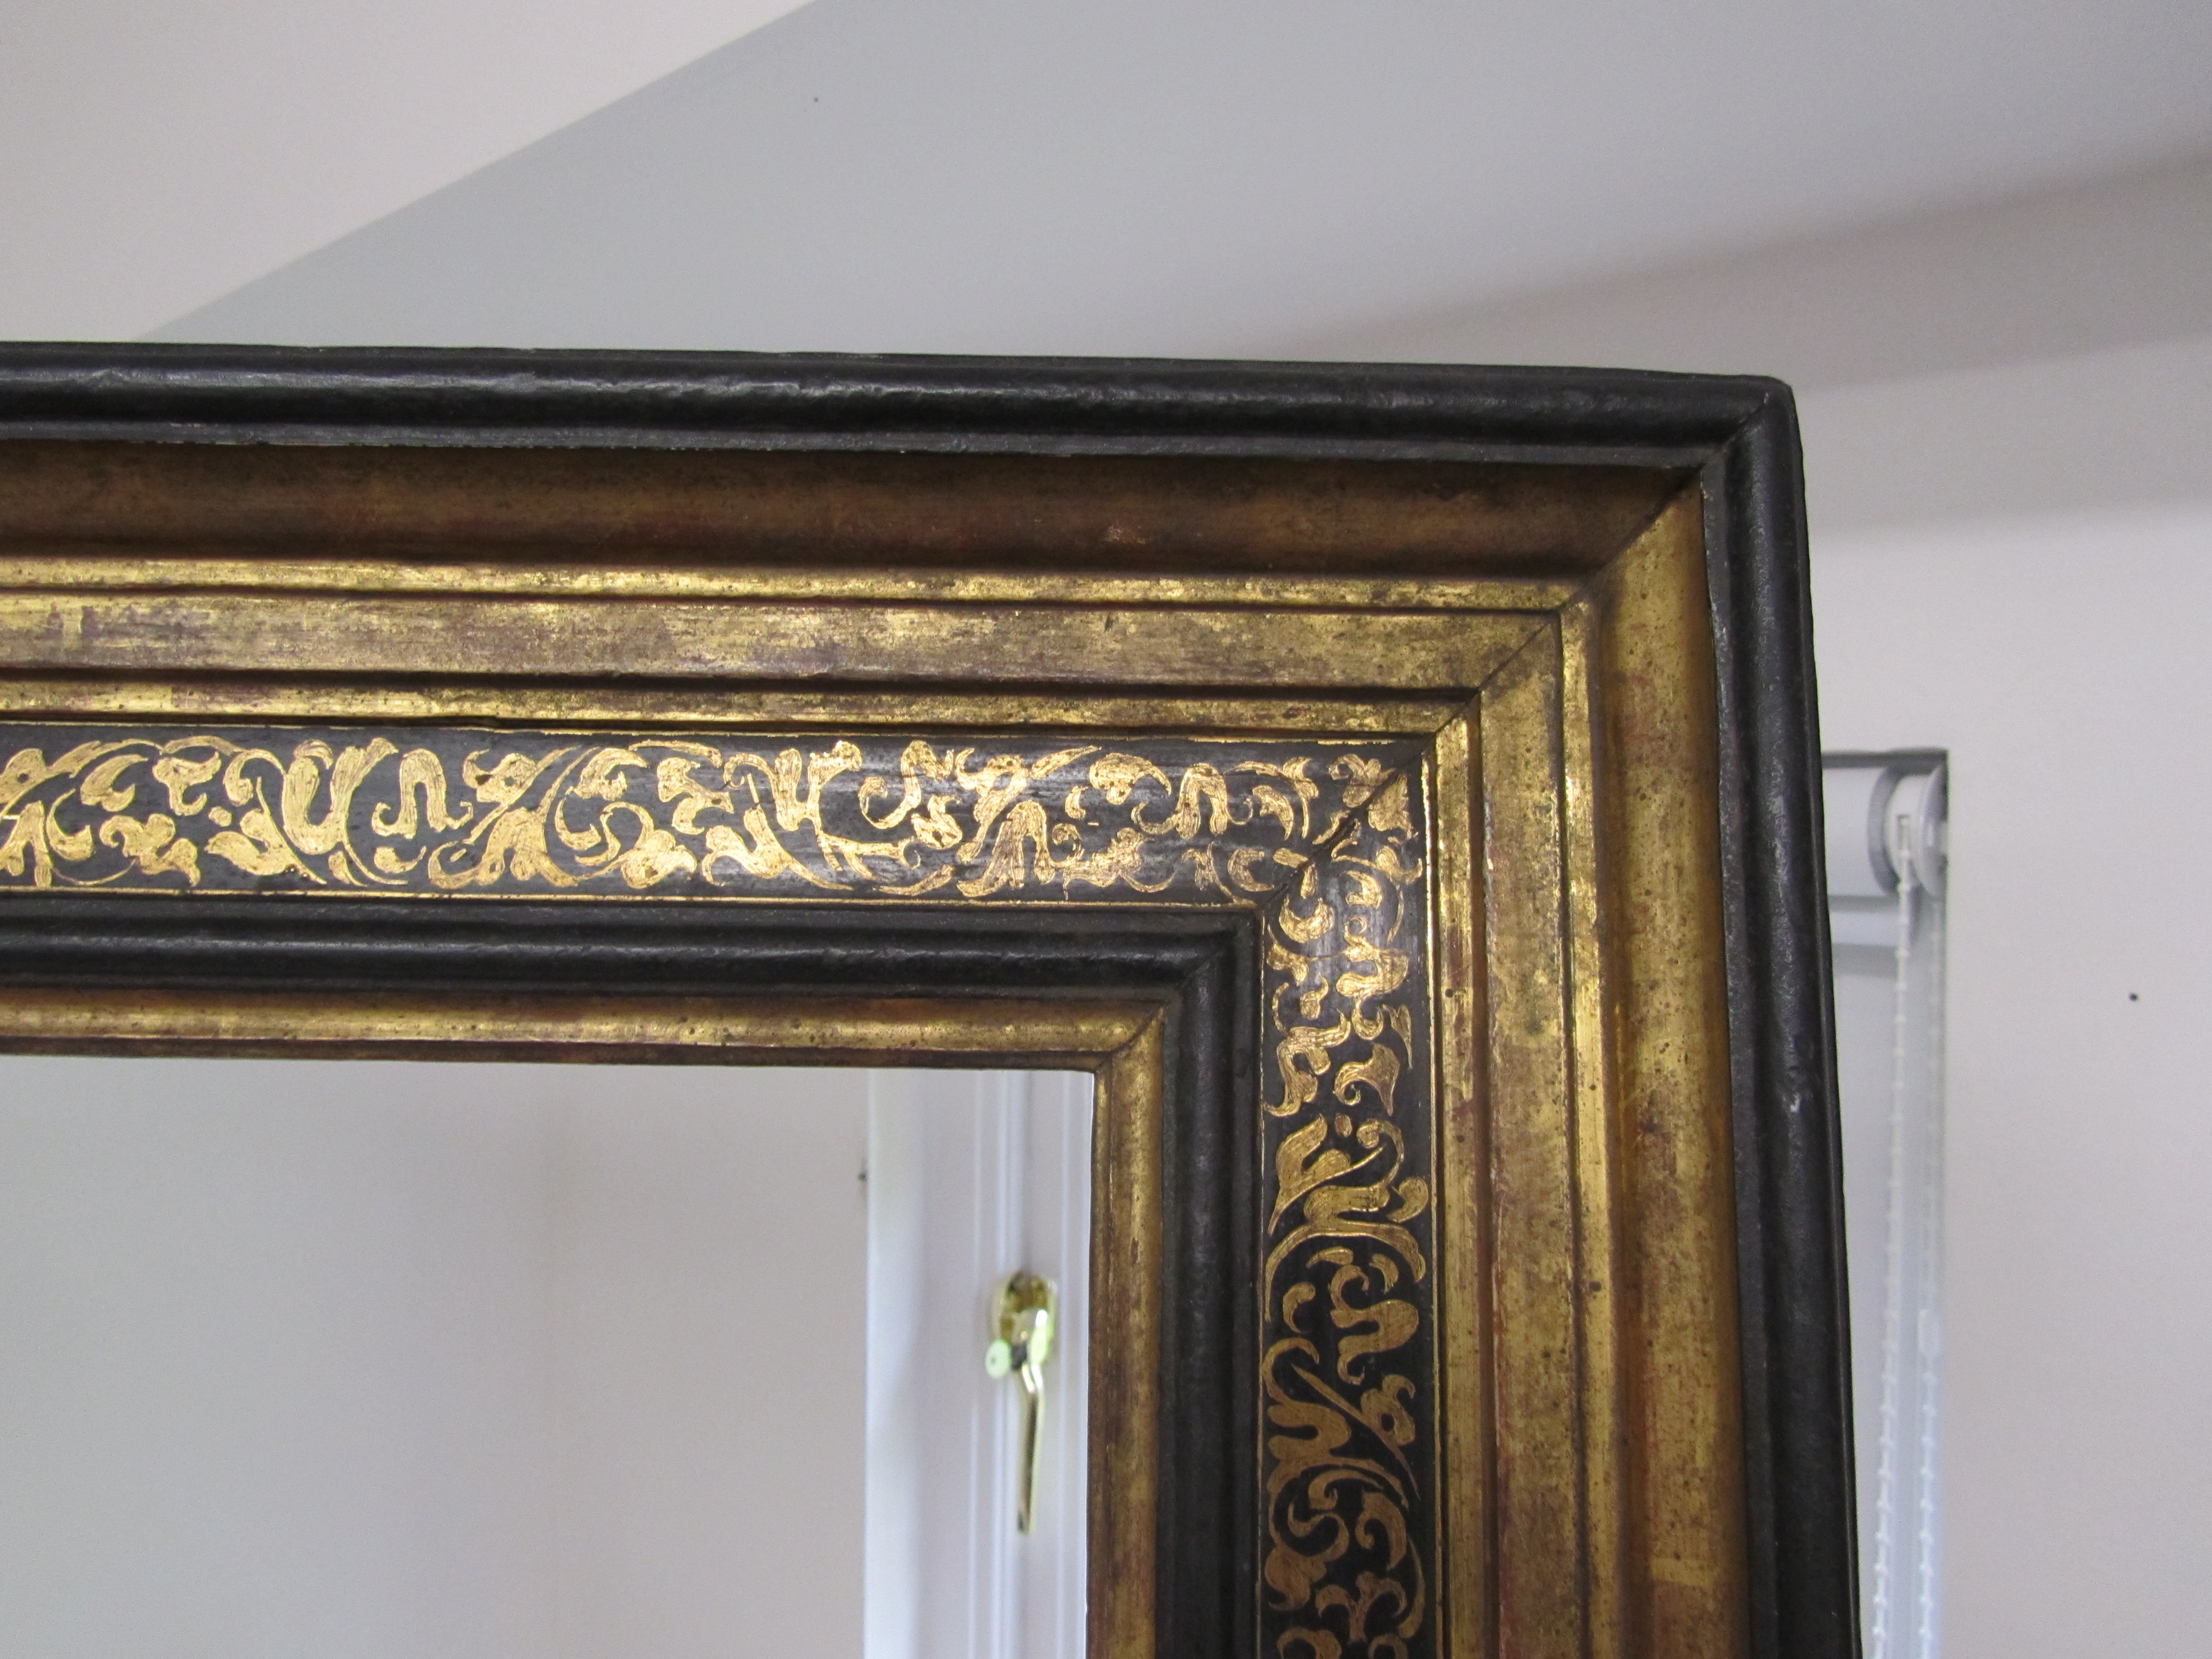 Italian reproduction frame with sgraffito decoration